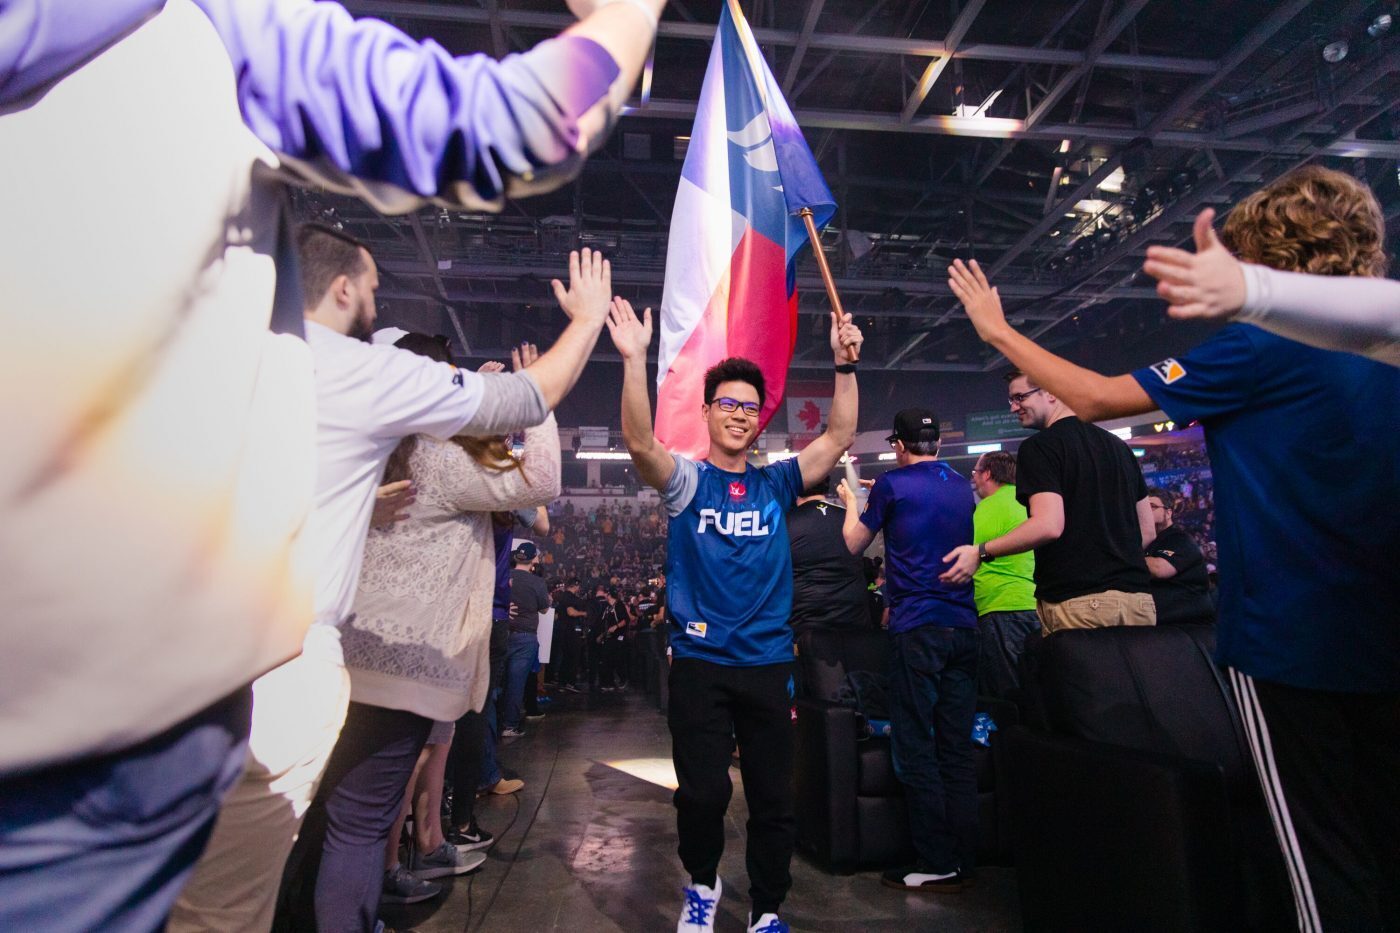 Dallas Fuel's Mickie during the Homestand weekend. (Image via Dallas Fuel)